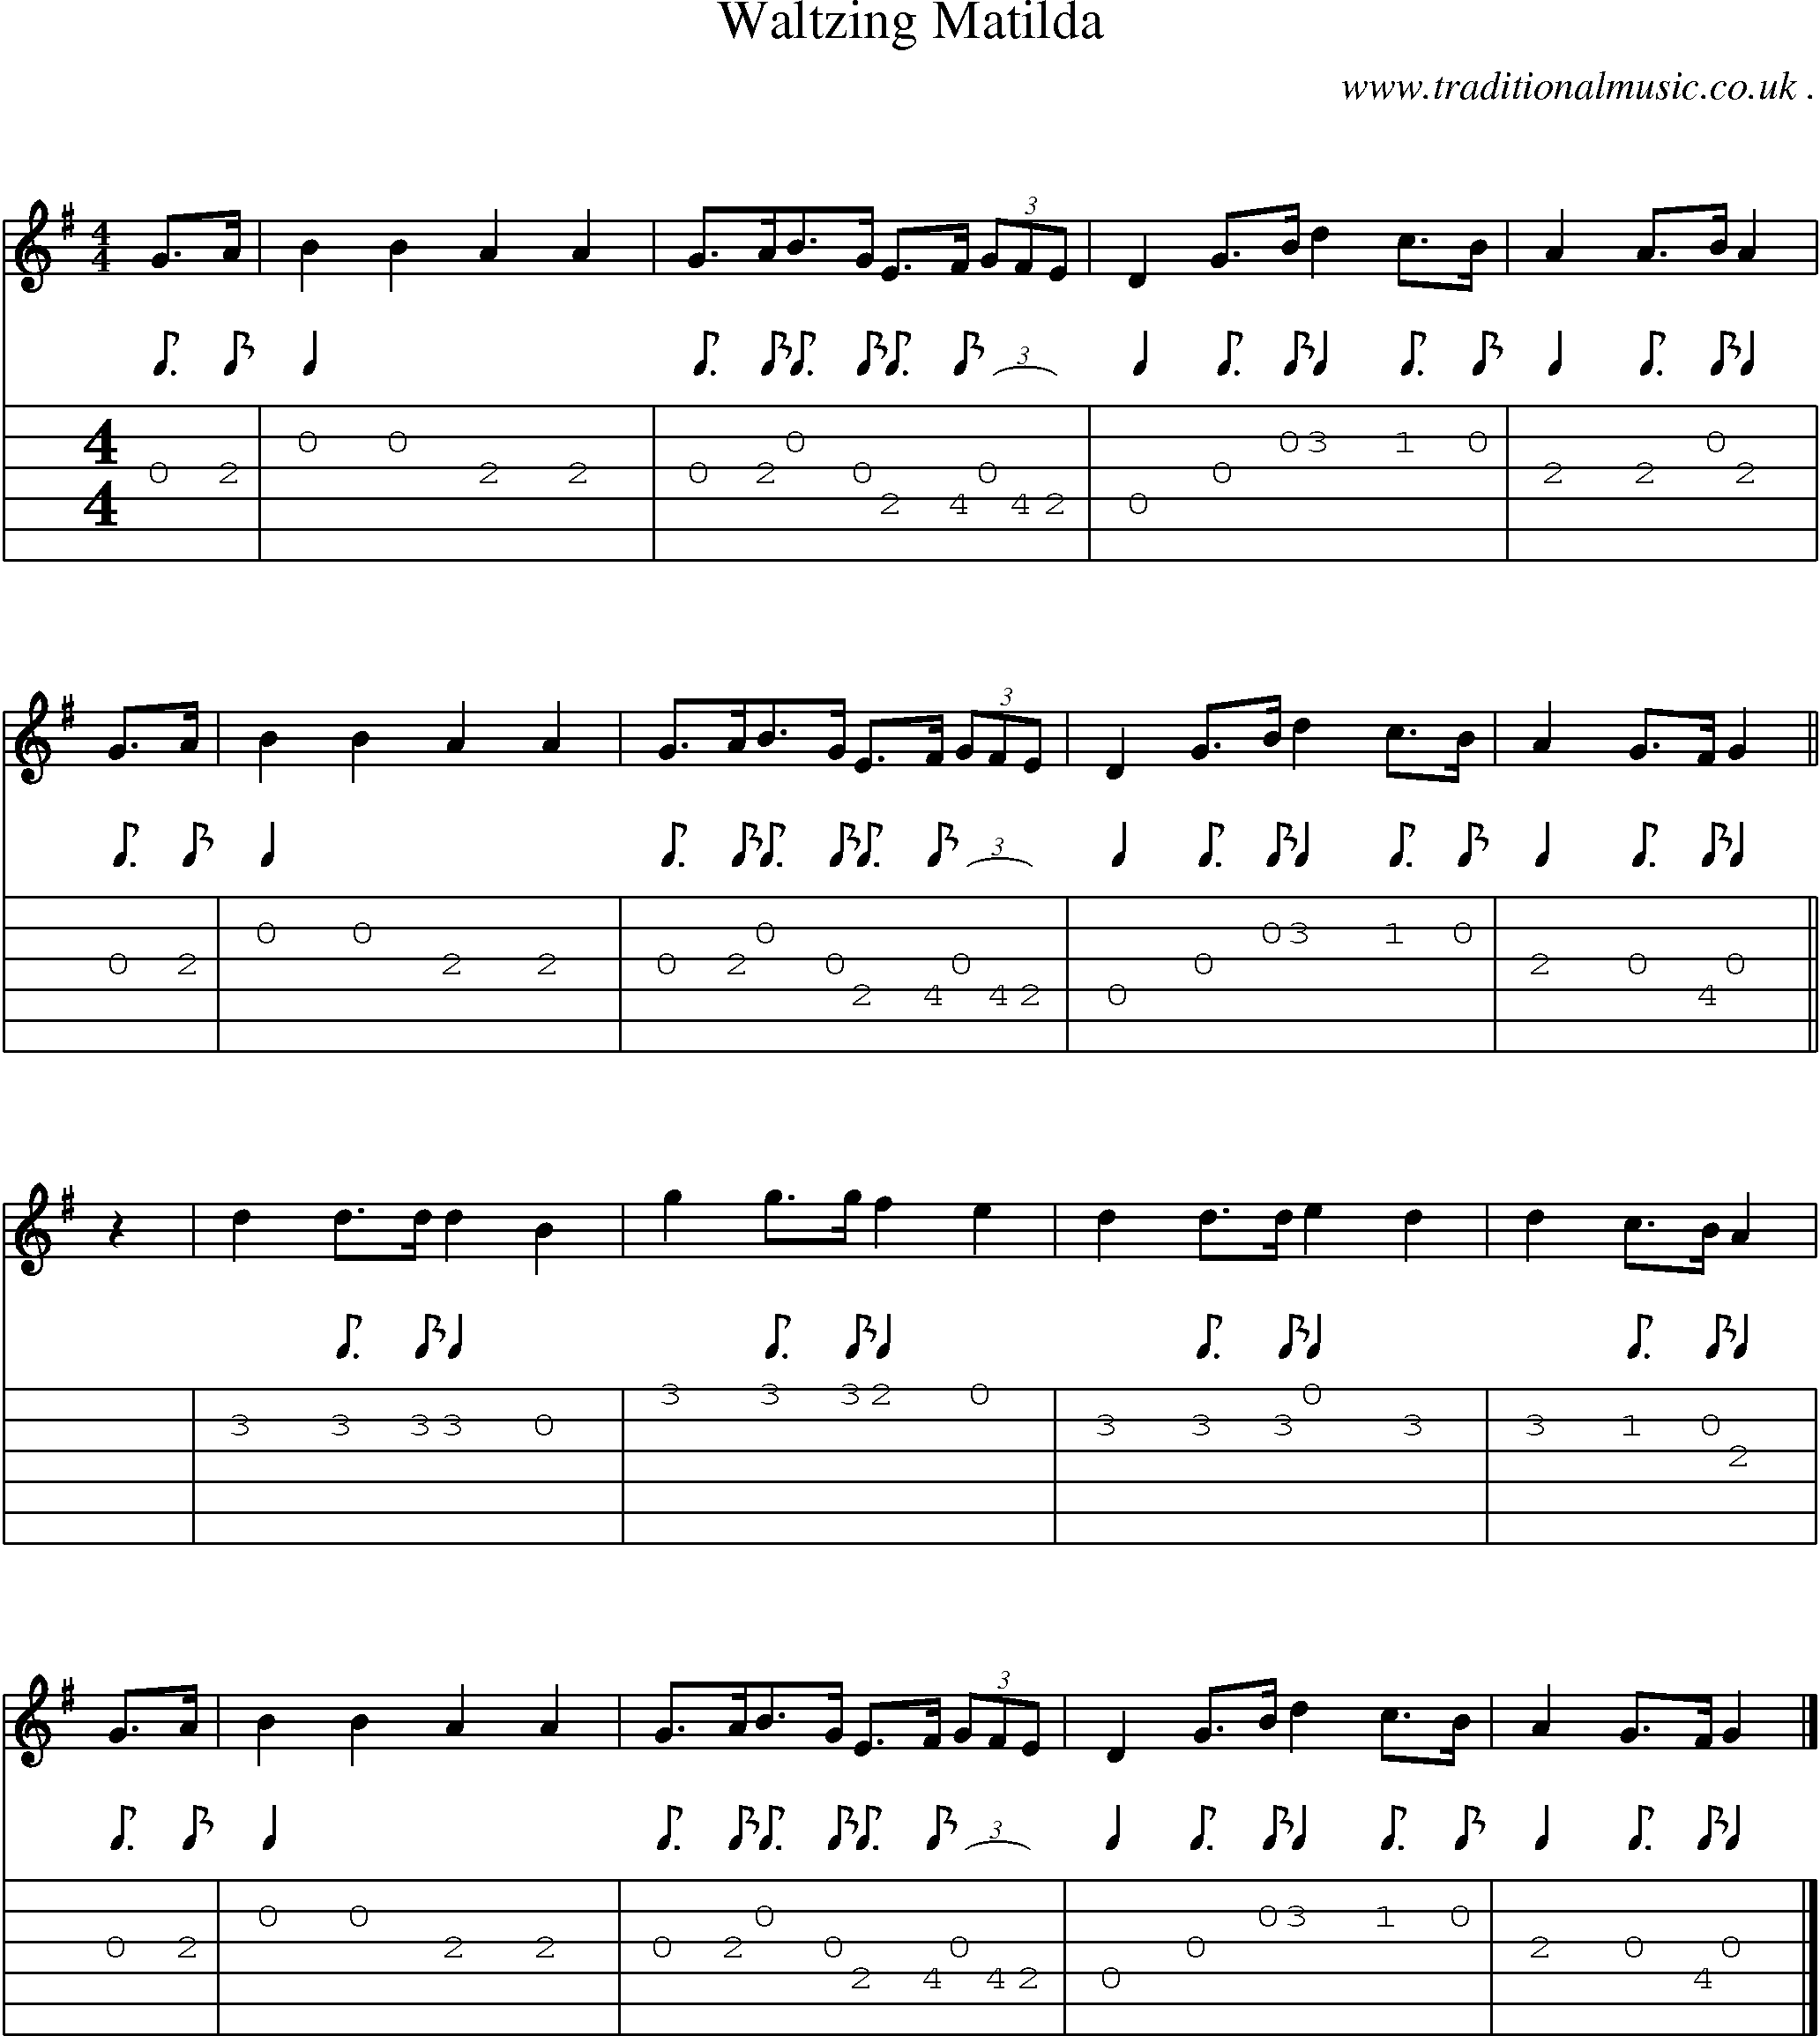 Sheet-music  score, Chords and Guitar Tabs for Waltzing Matilda